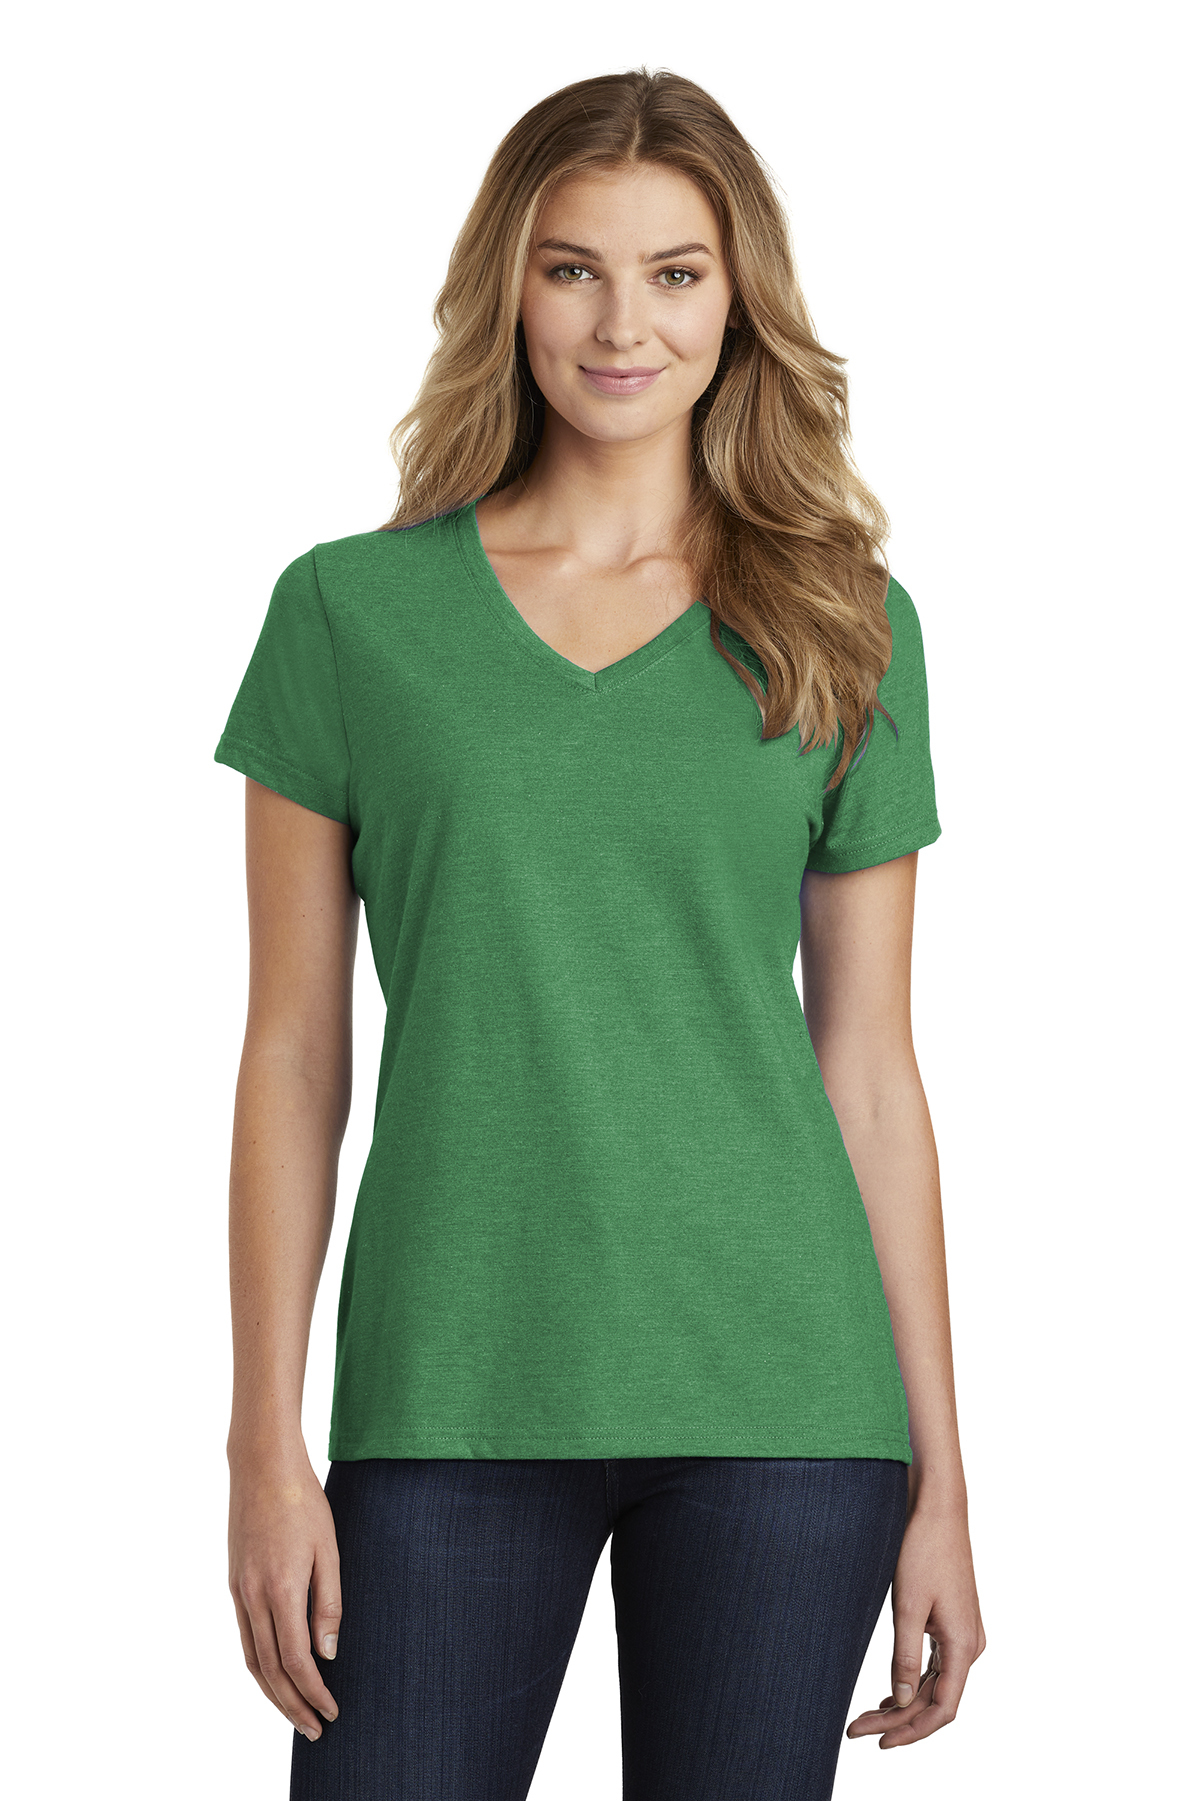 click to view Athletic Kelly Green Heather